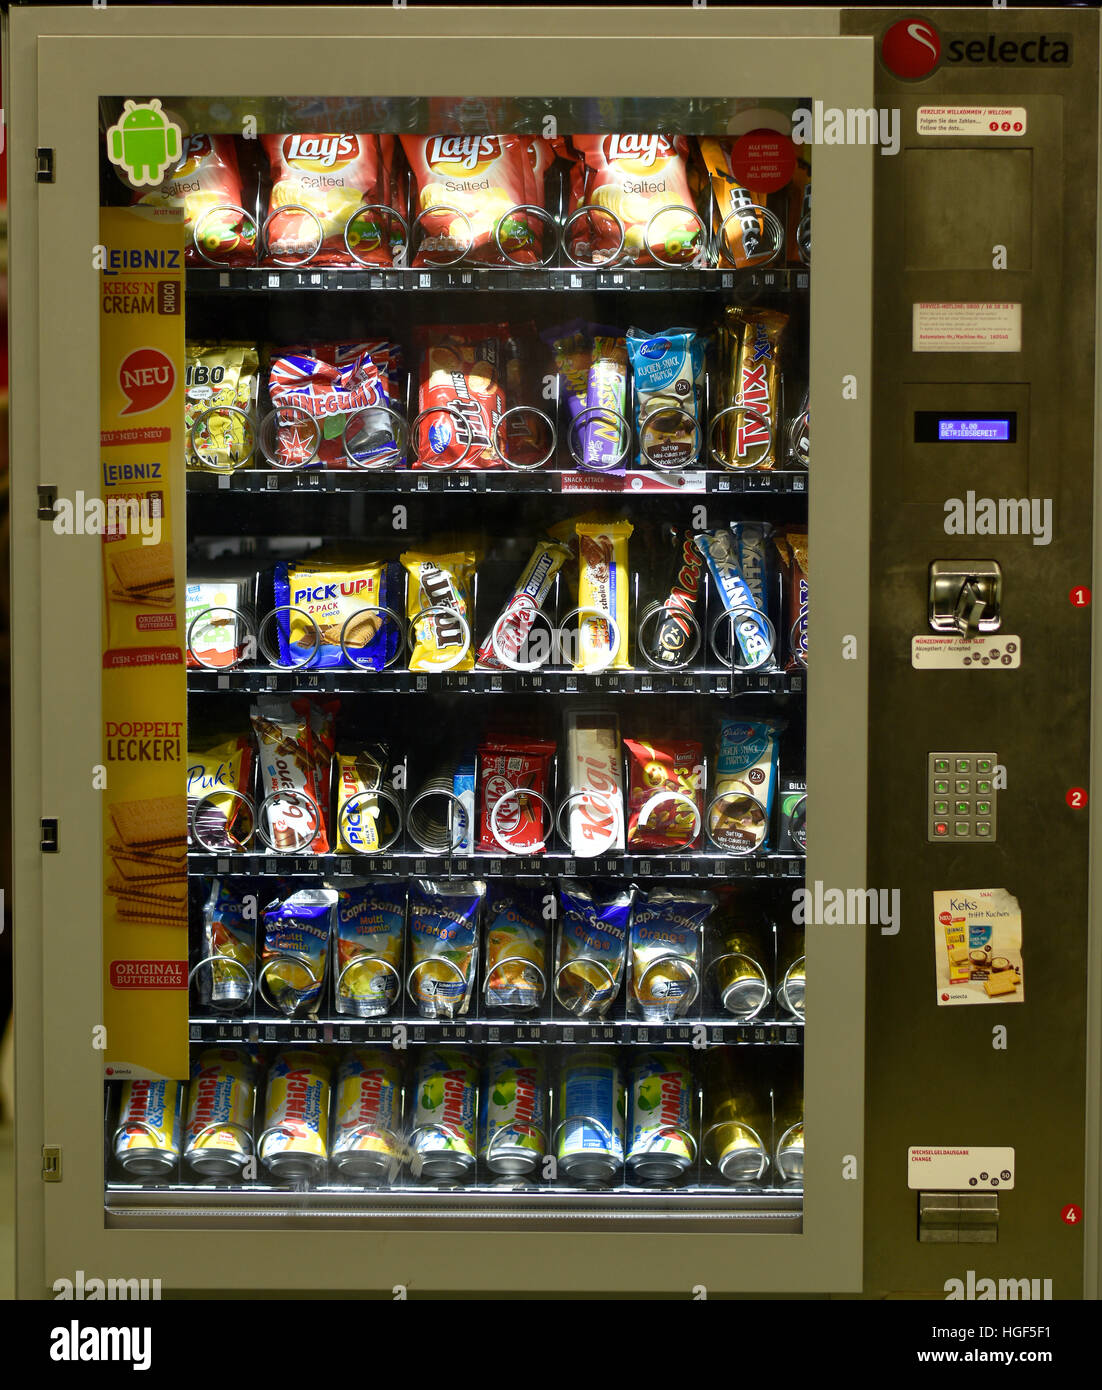 Snacks and drinks in vending machine, Germany Stock Photo